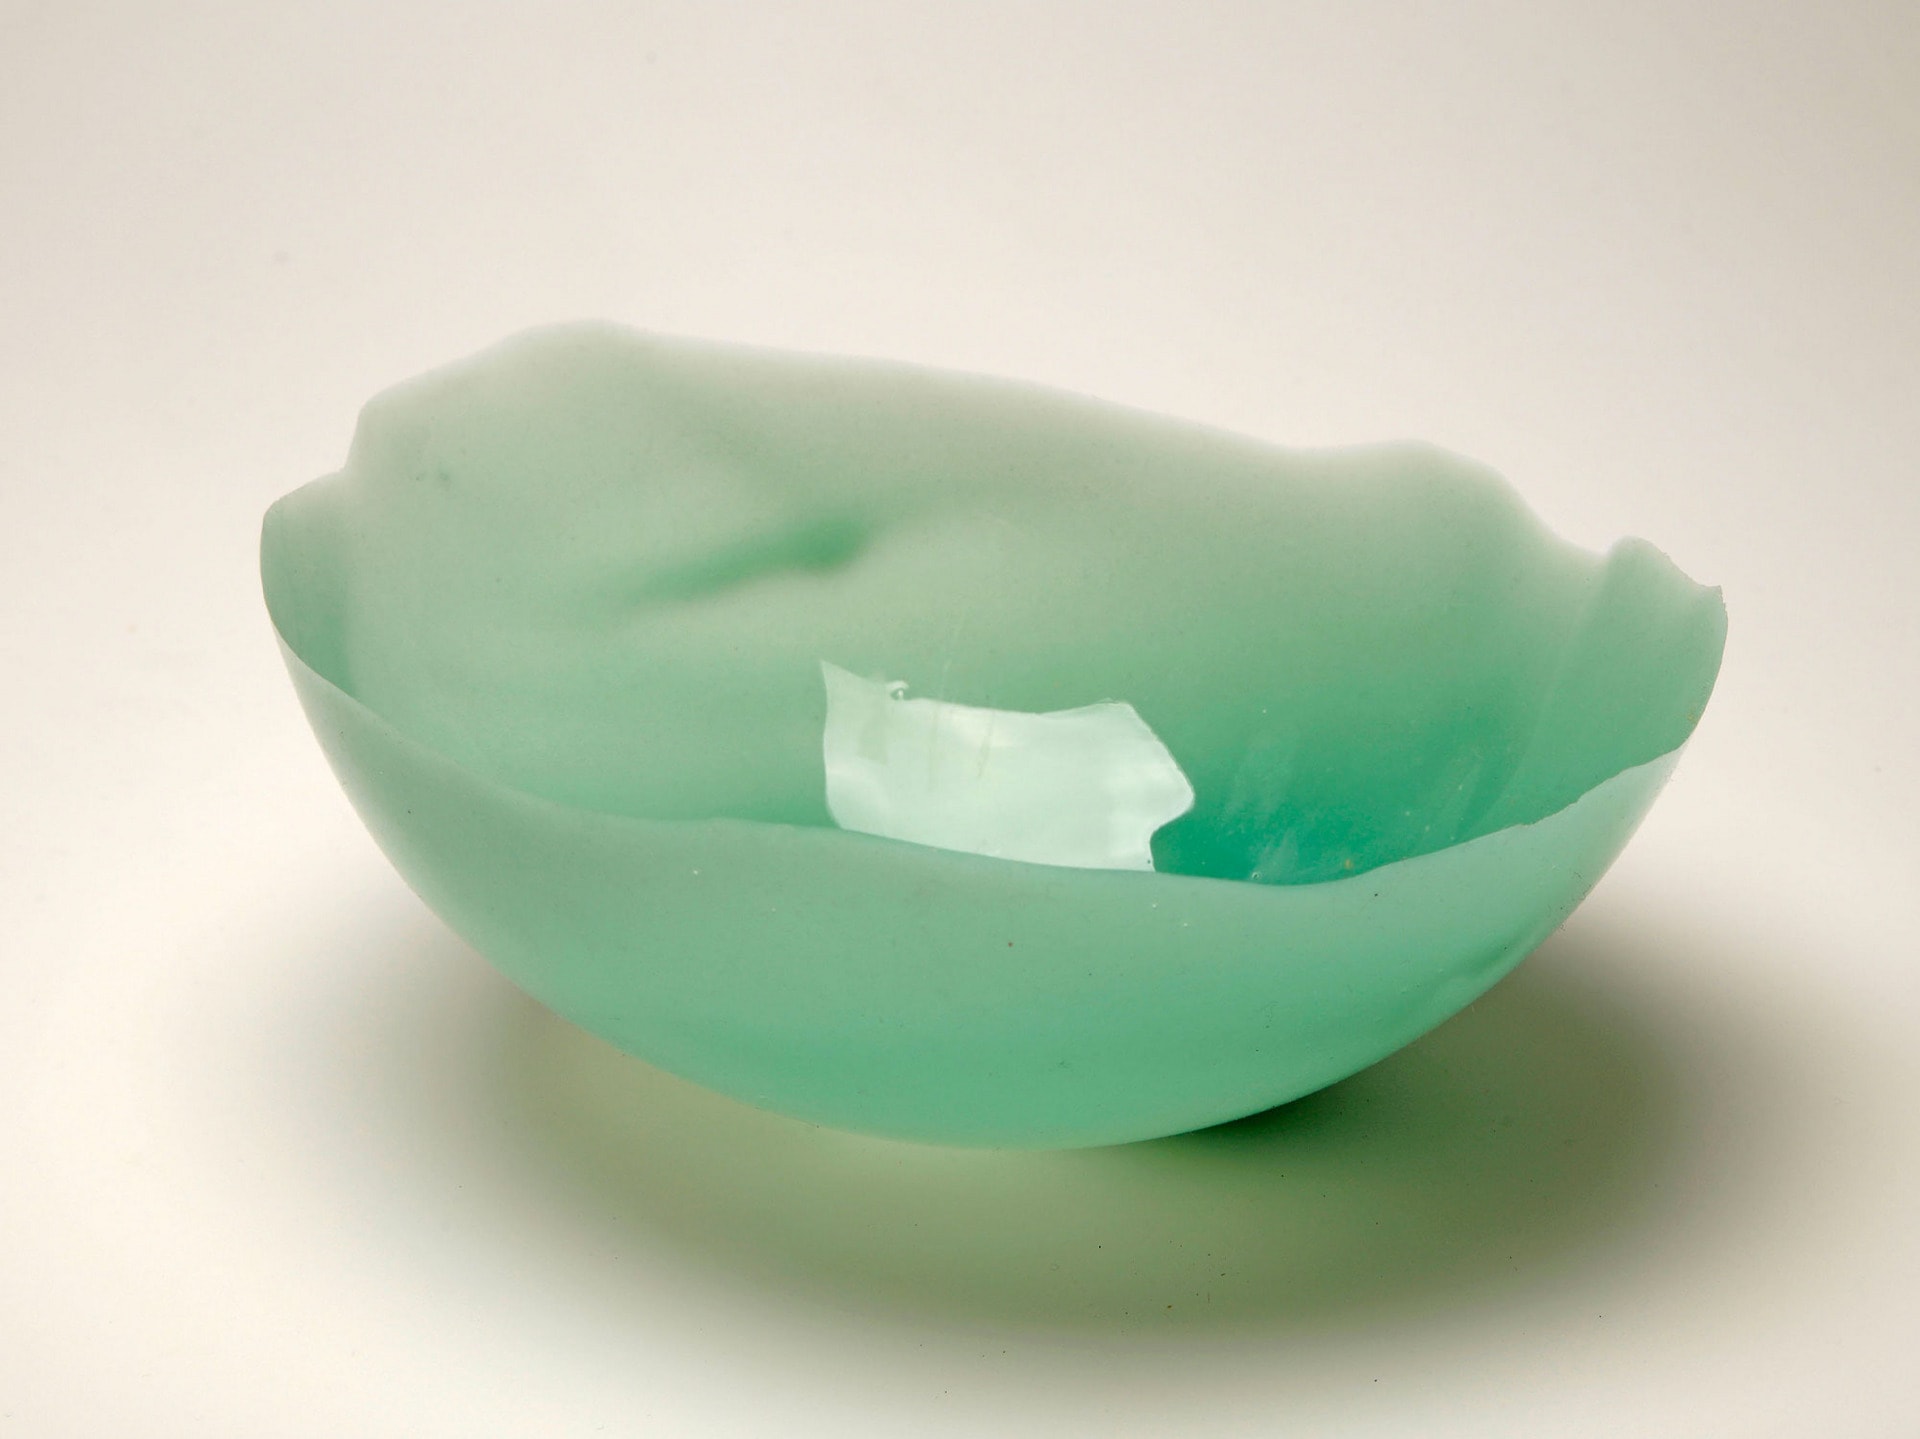 Cup of Information, silicone and viridian green pigment, 8.5 x 21.5 x 8.5 cm, 2022.